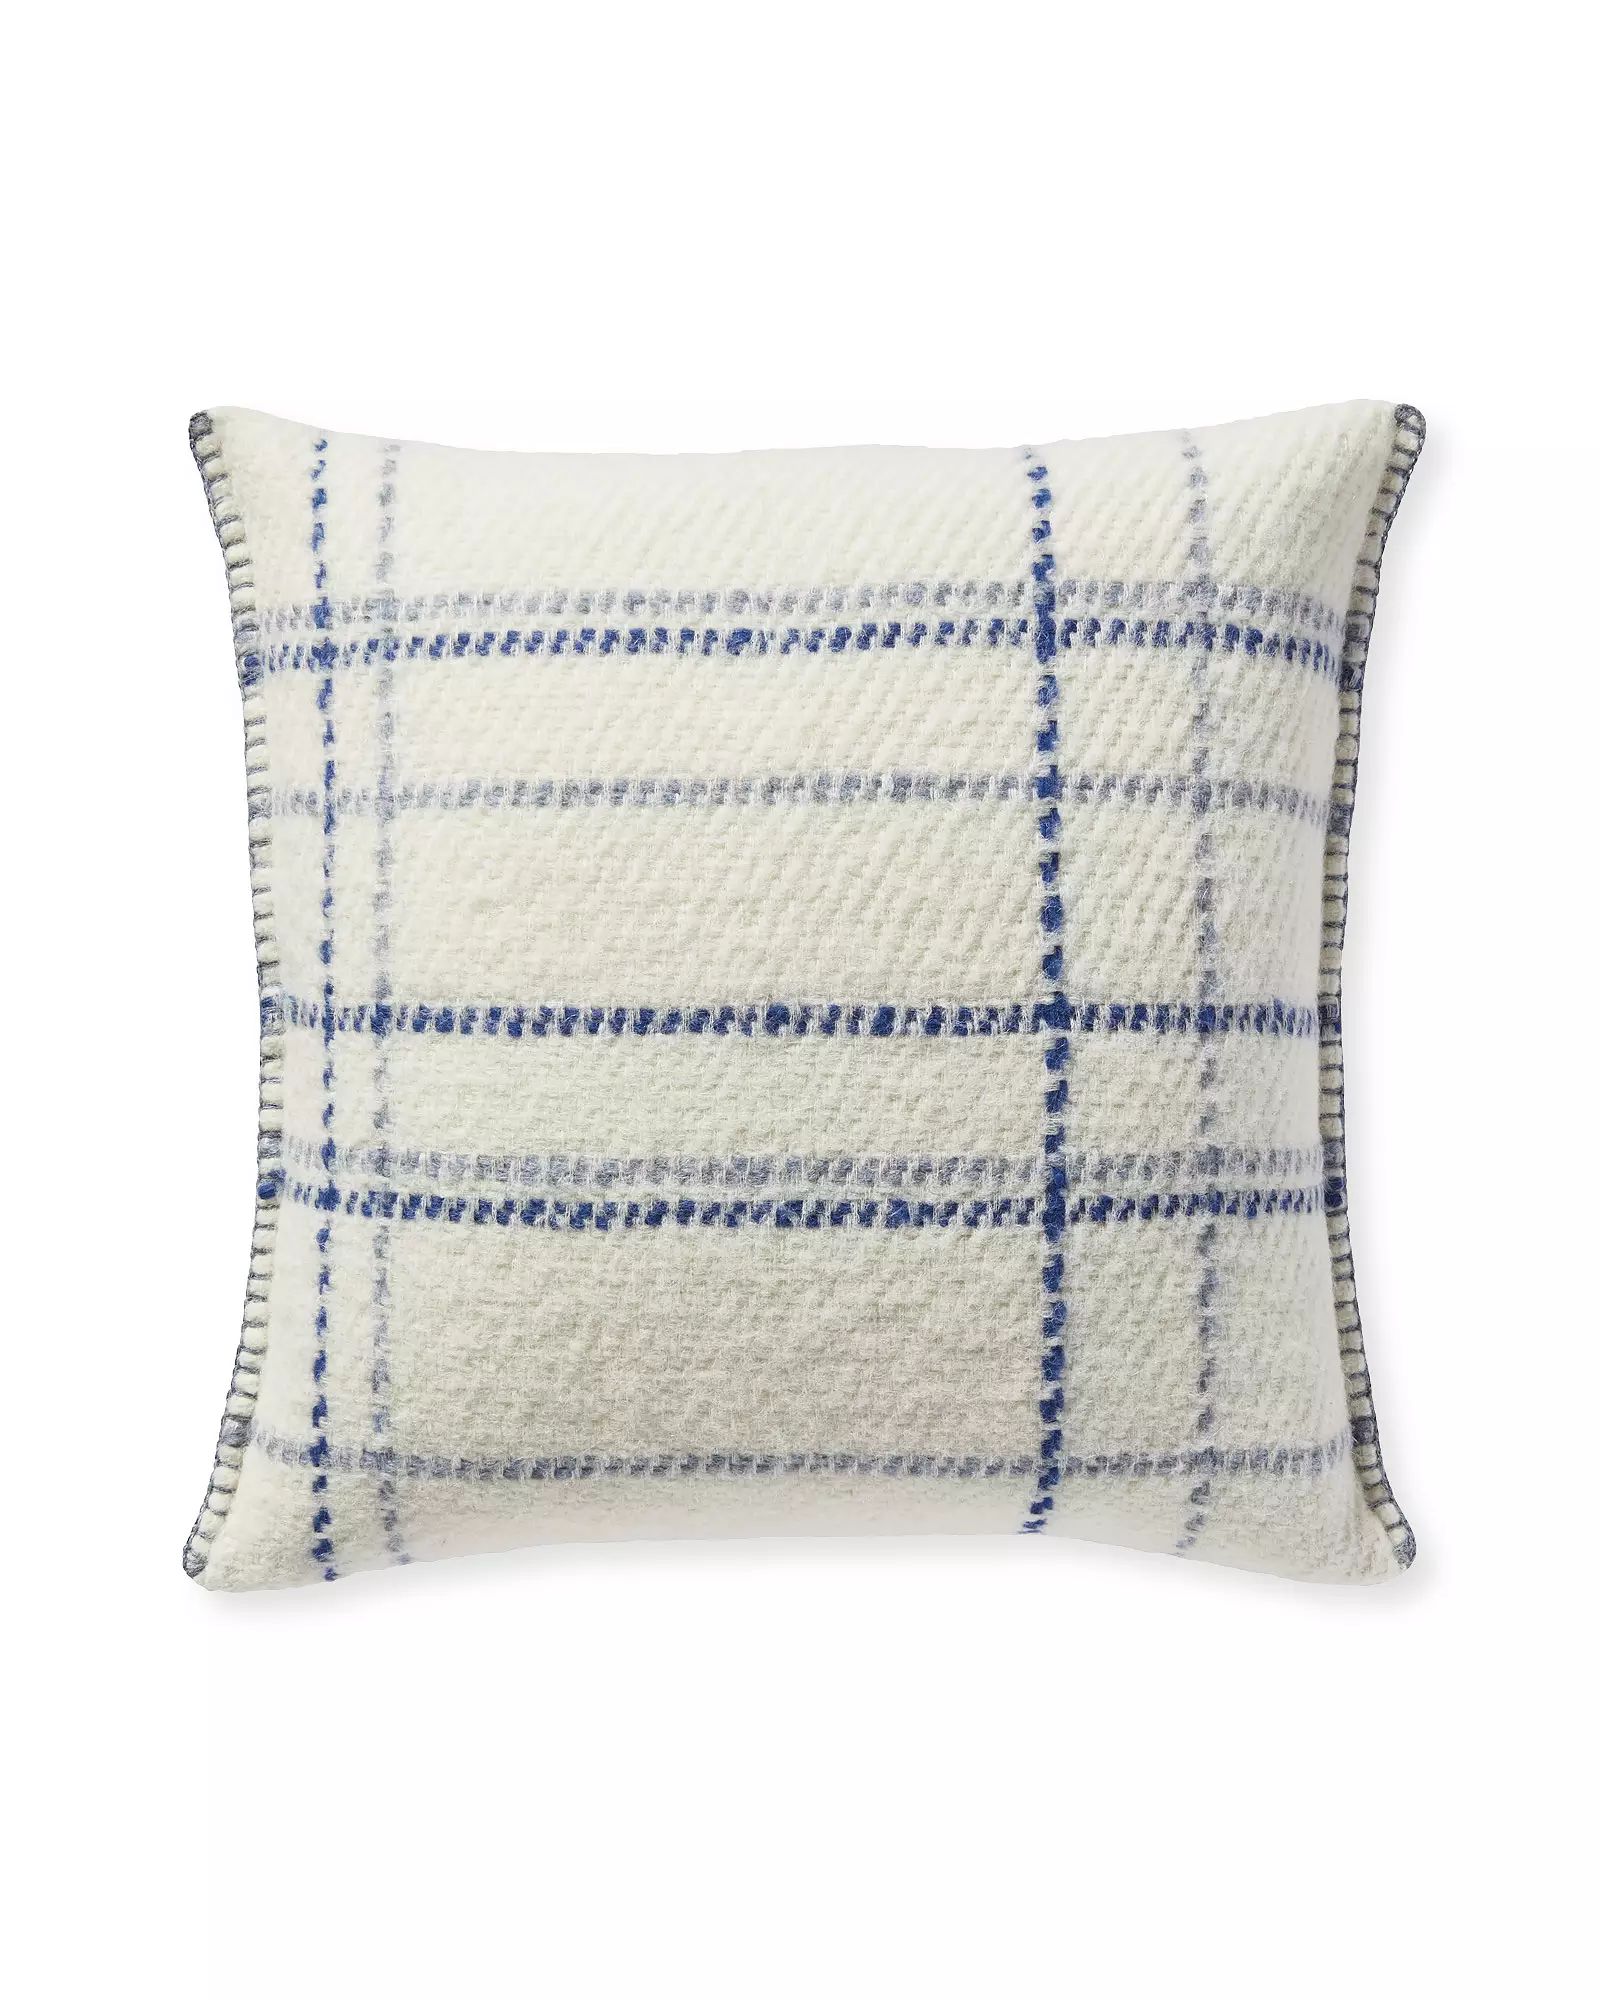 Stratton Pillow Cover | Serena and Lily